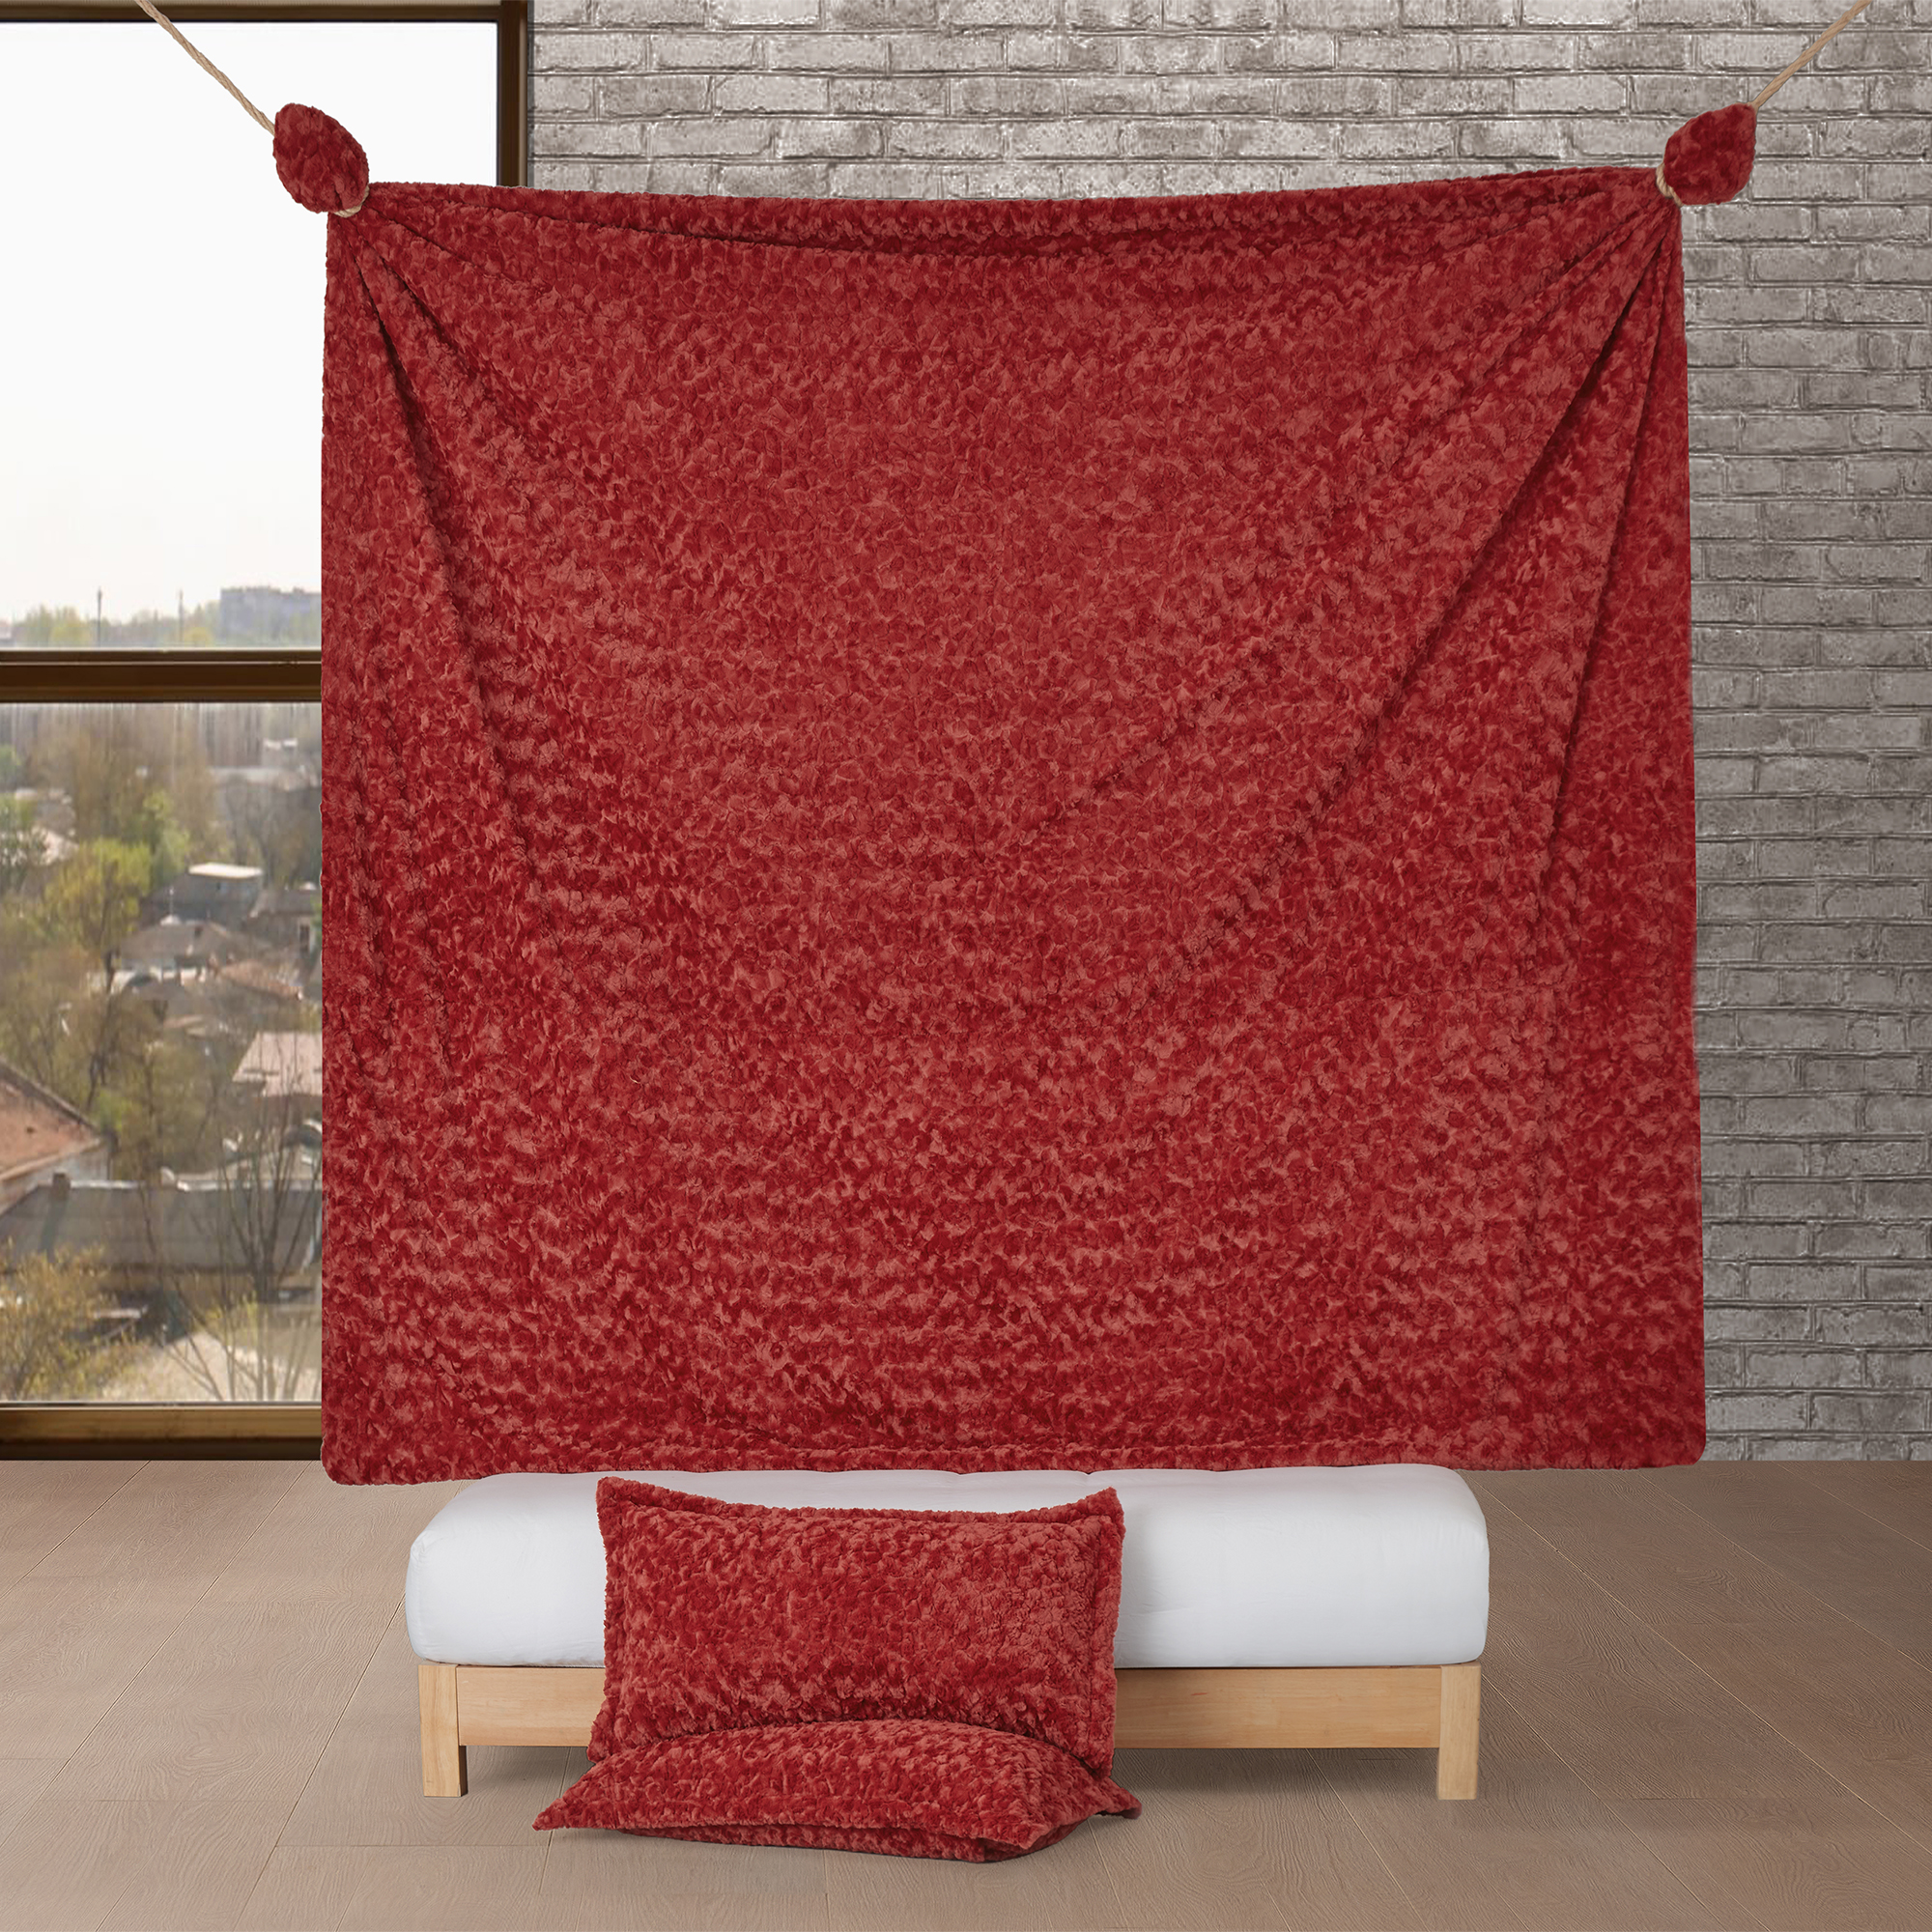 Obsessed - Coma Inducer® Oversized King Comforter - Deepest Red